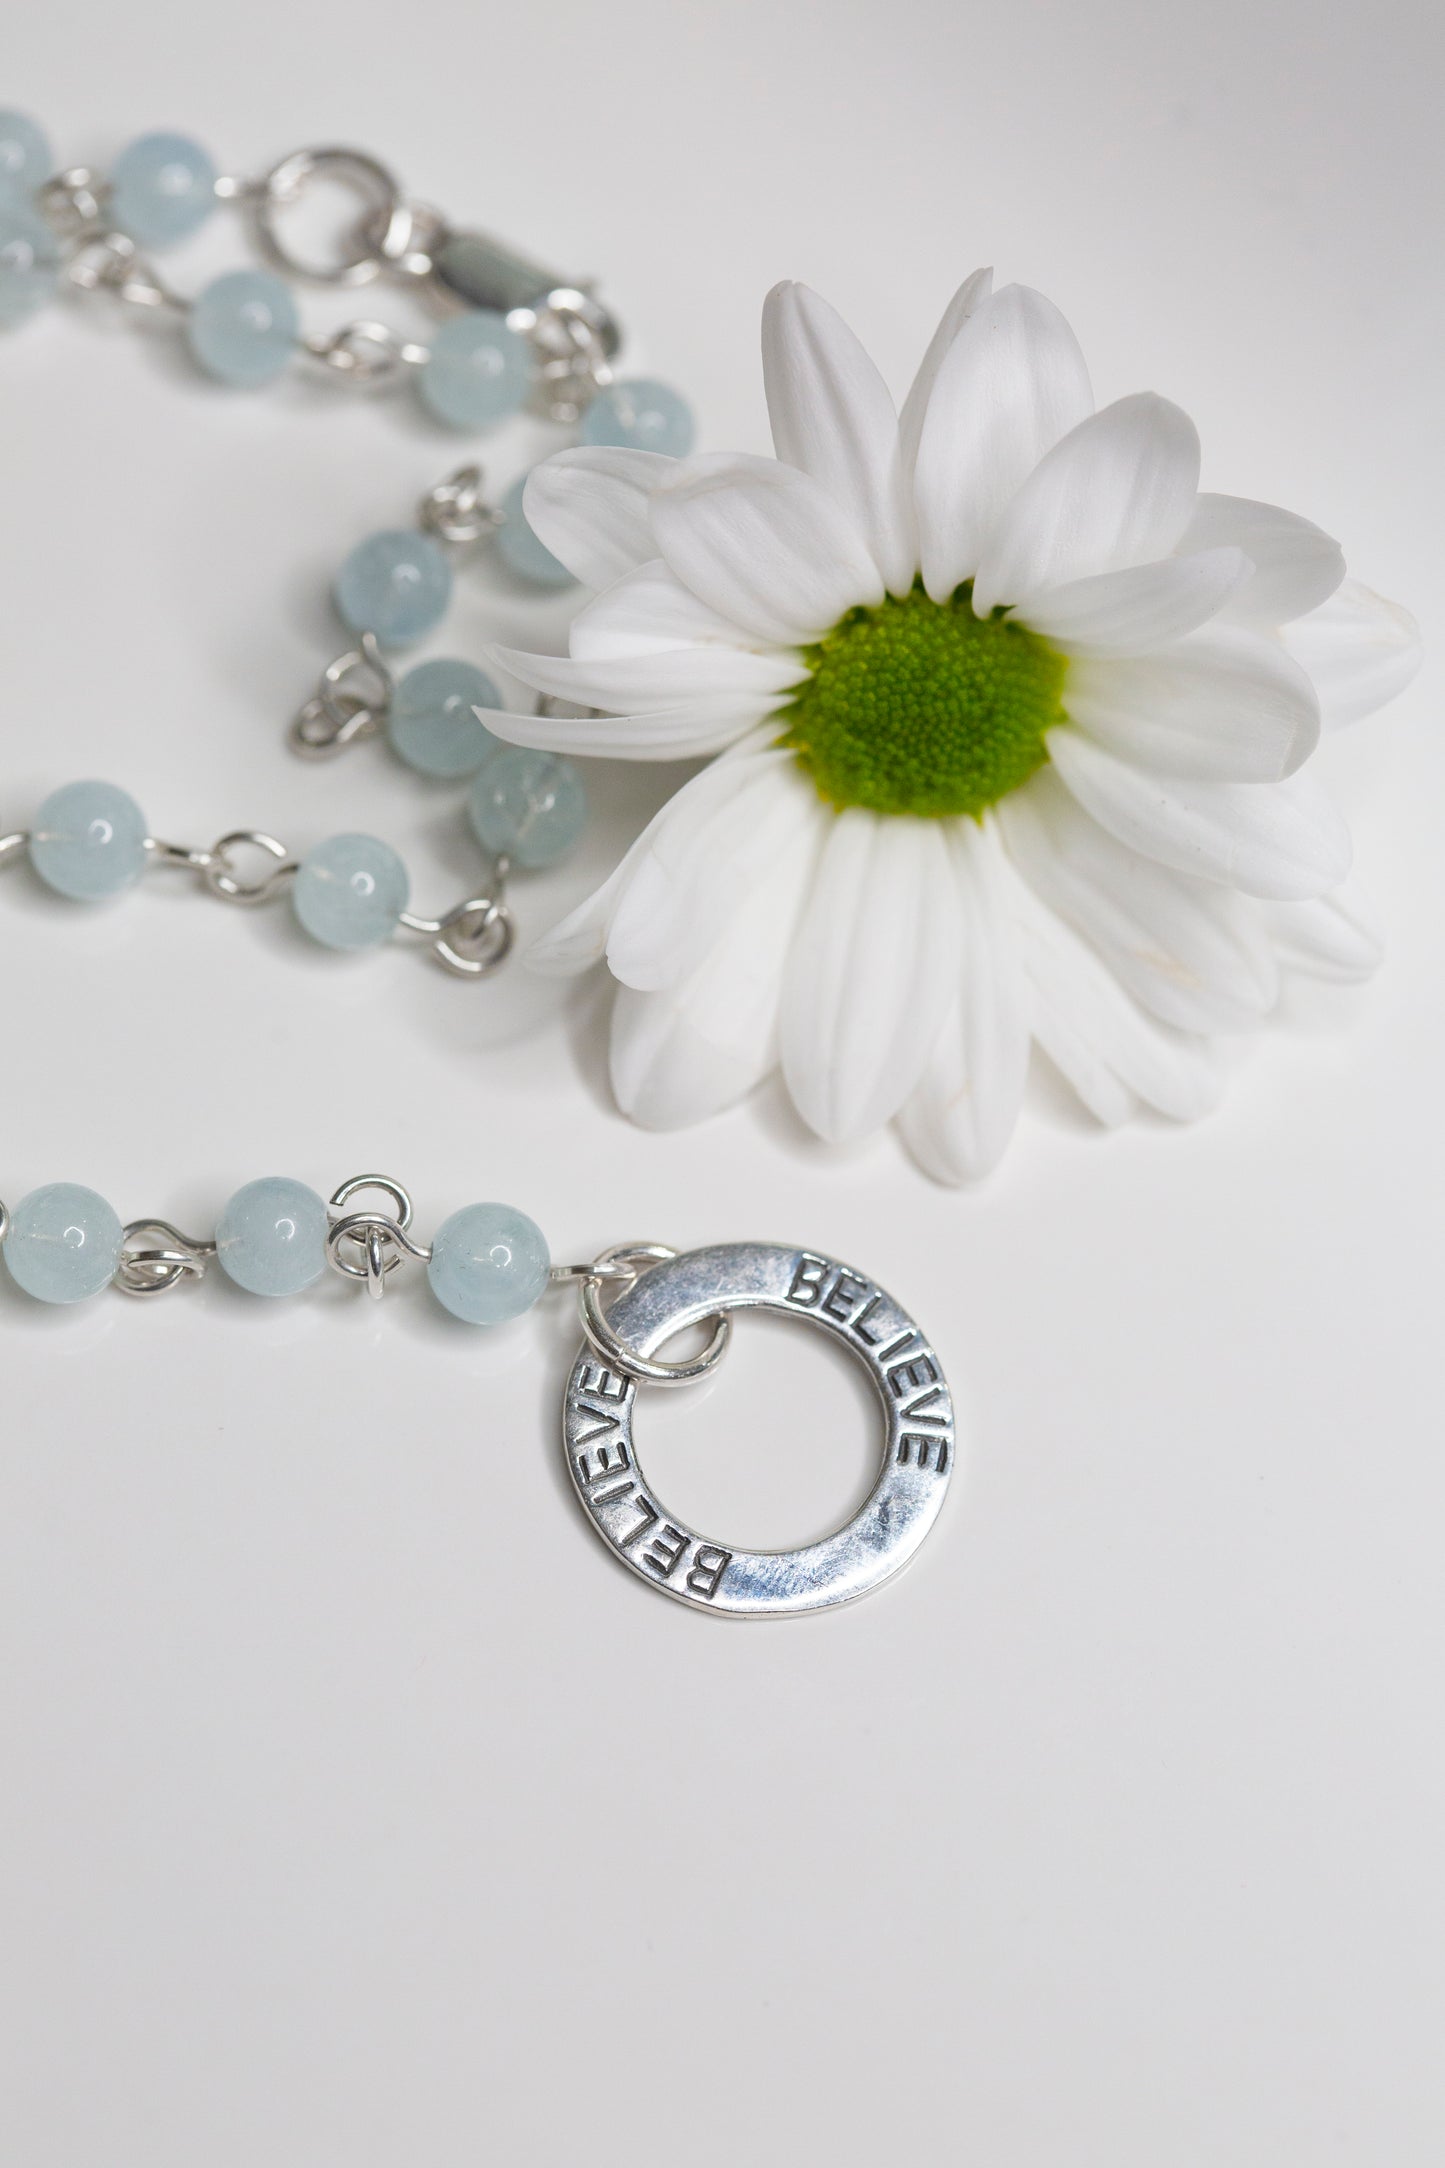 Believe in Beauty: Sterling Silver Aquamarine Necklace